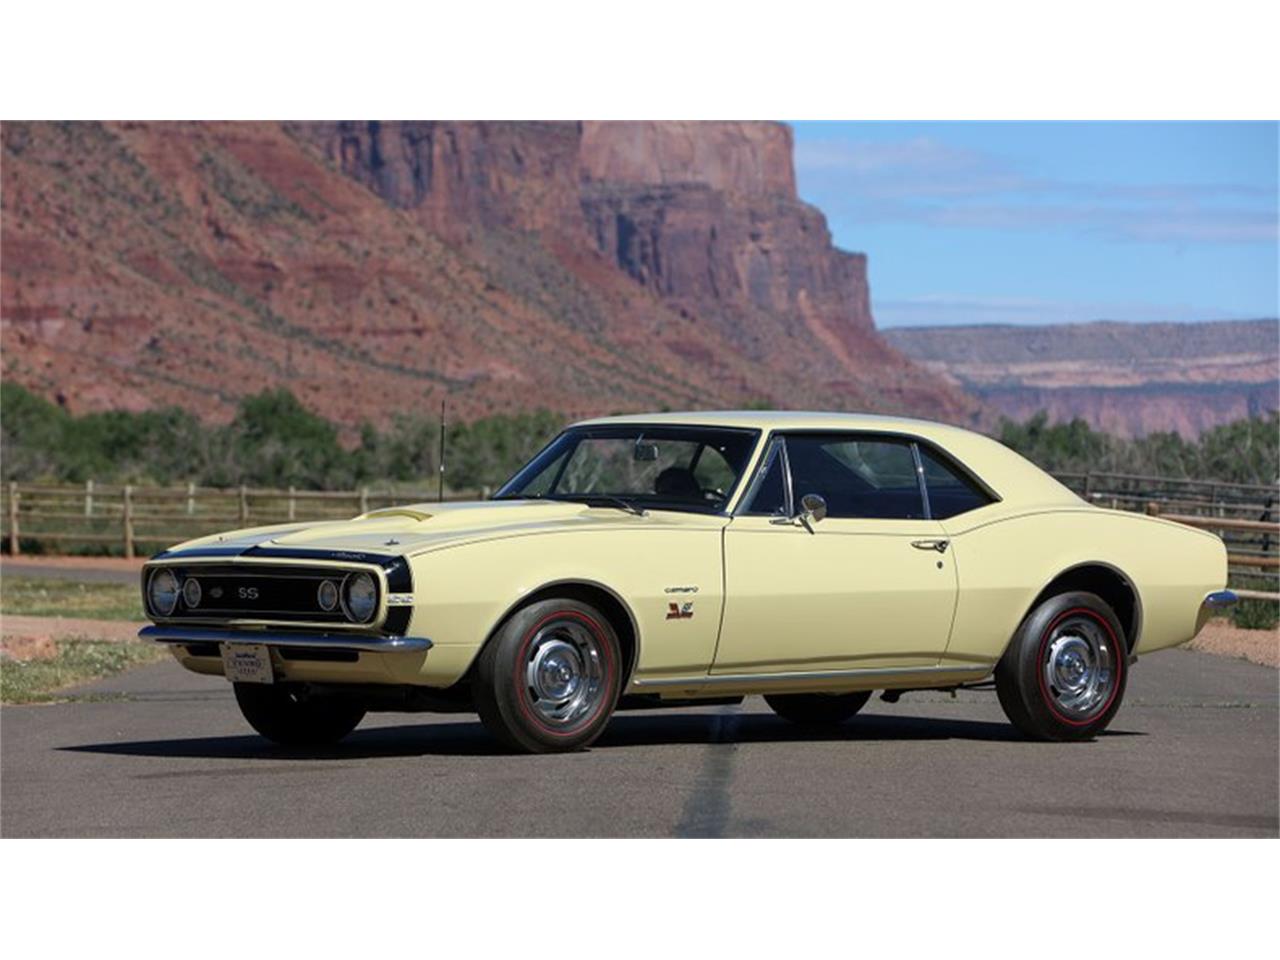 For Sale at Auction: 1967 Chevrolet Camaro SS in Monterey, California for sale in Monterey, CA